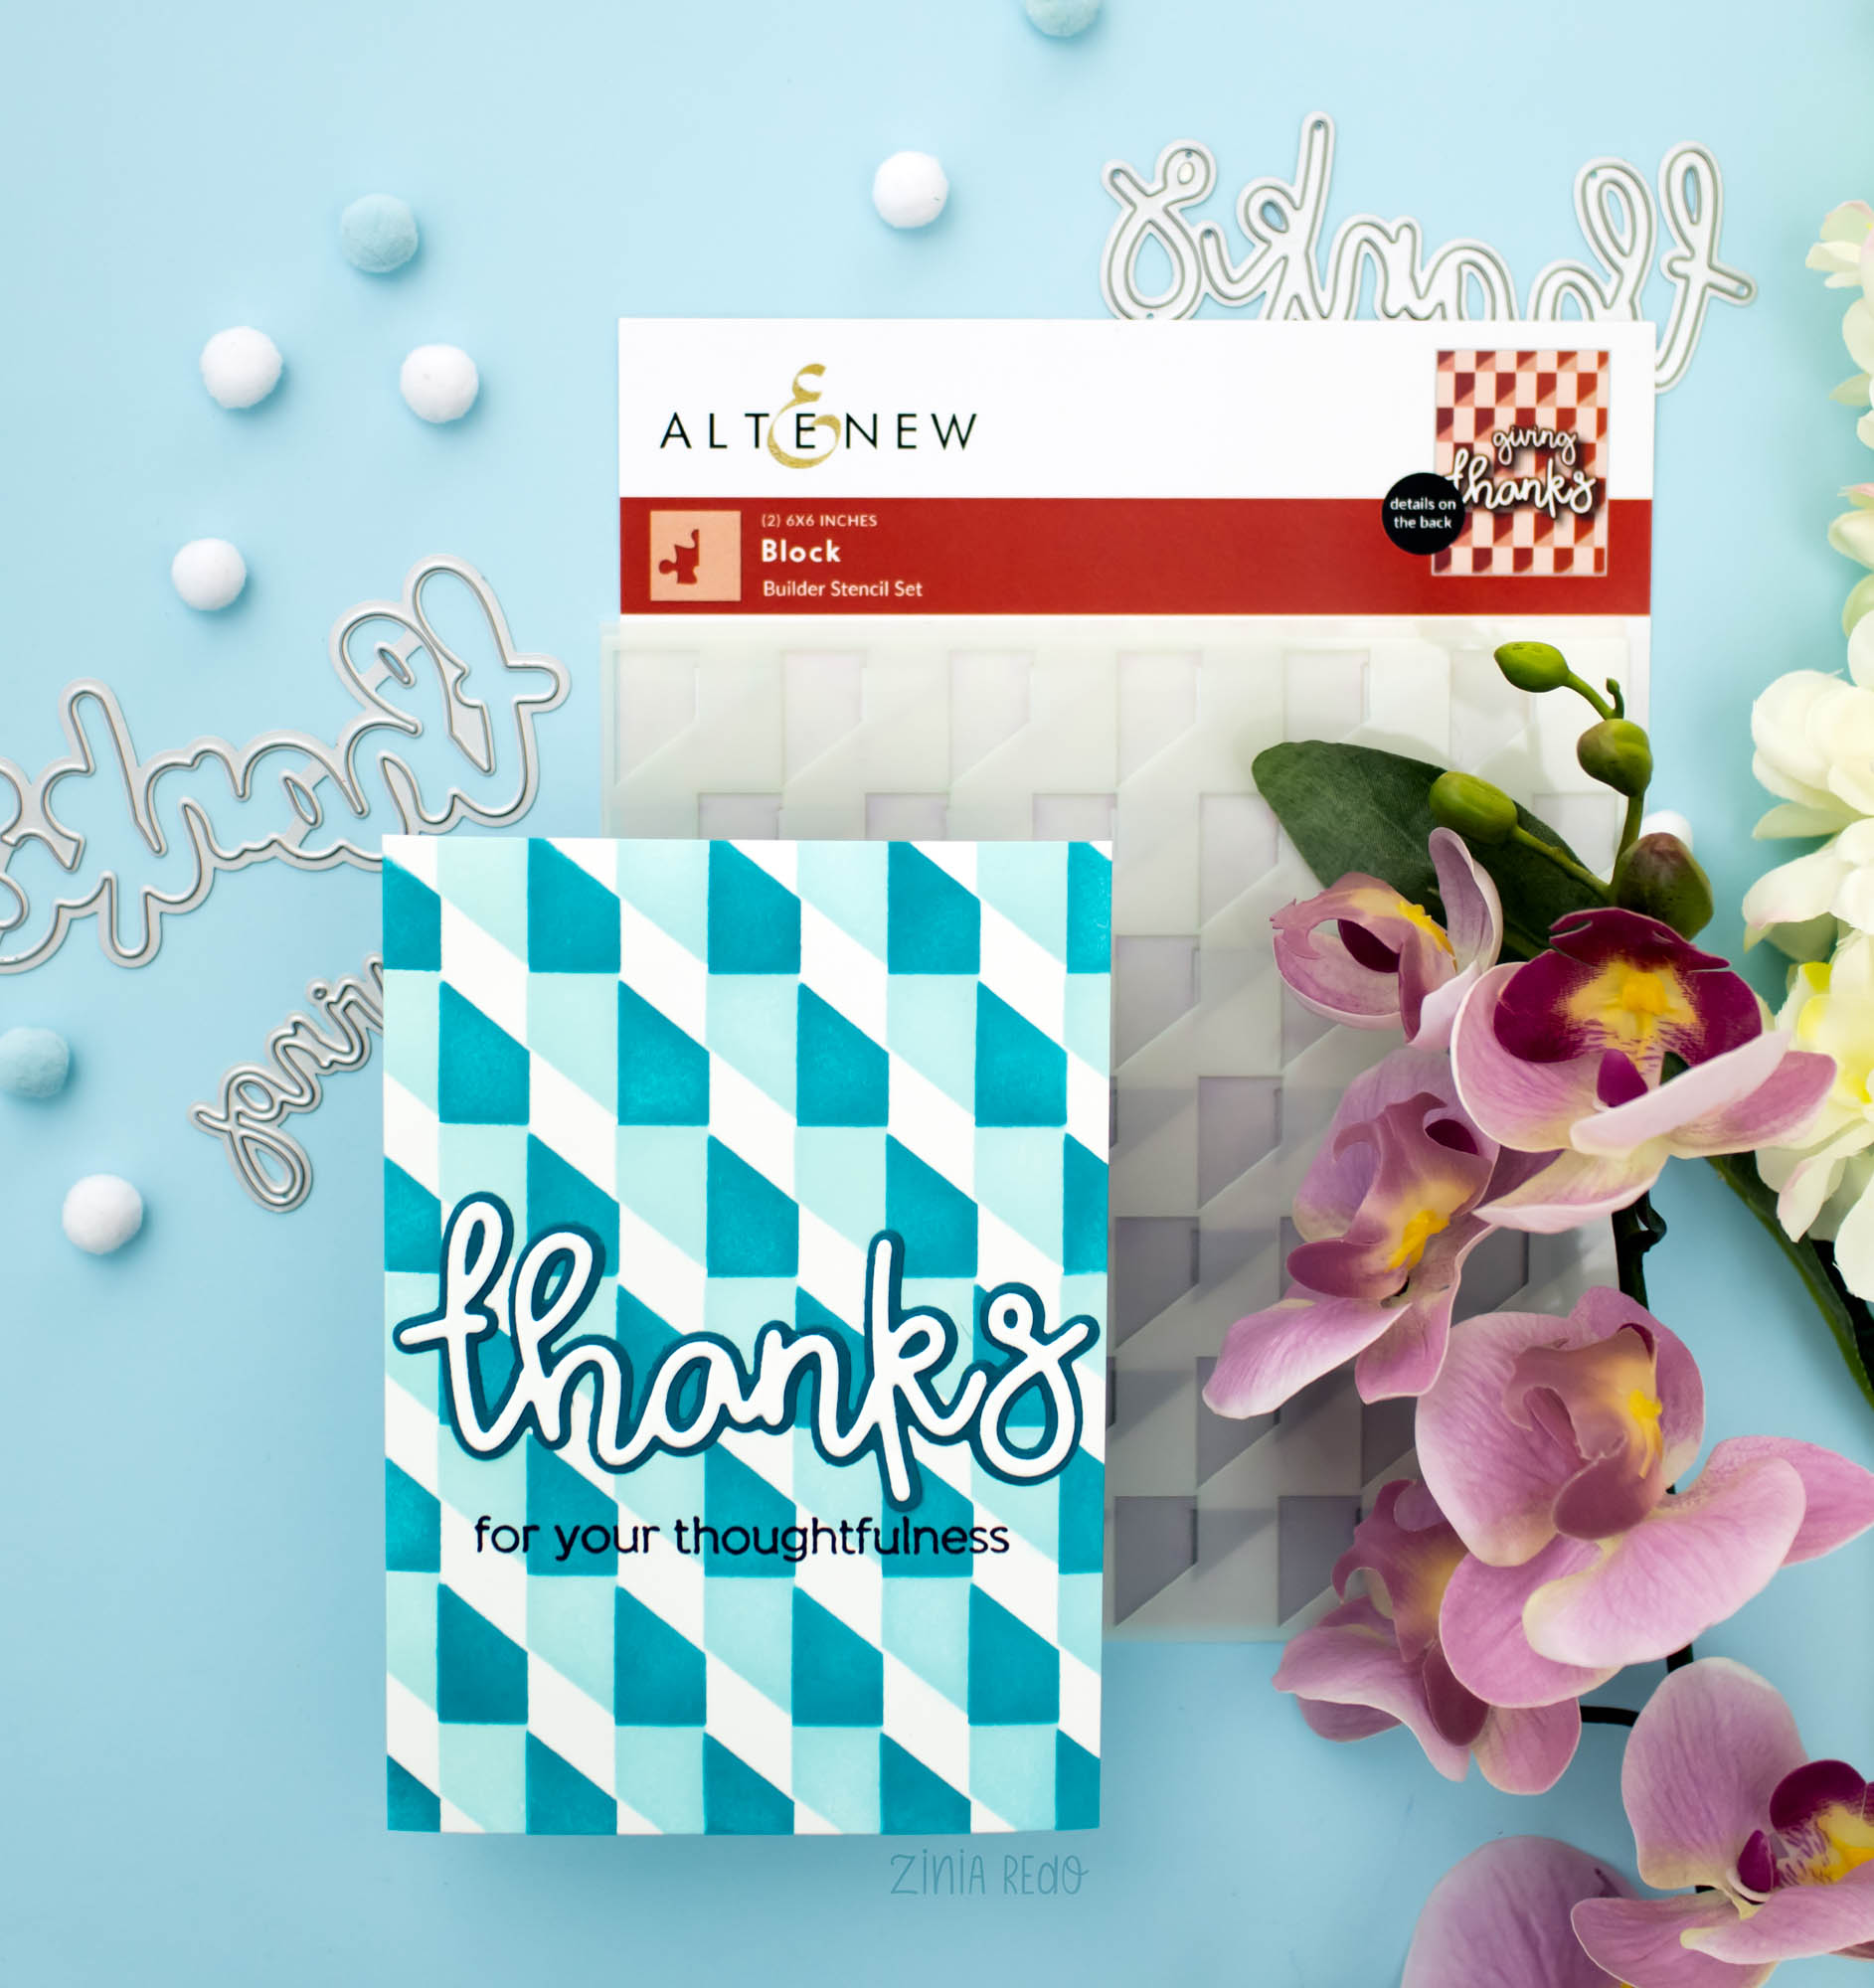 Zinia Redo Altenew Handmade Cards with Block Builder Stencil, All About You Word Die Set